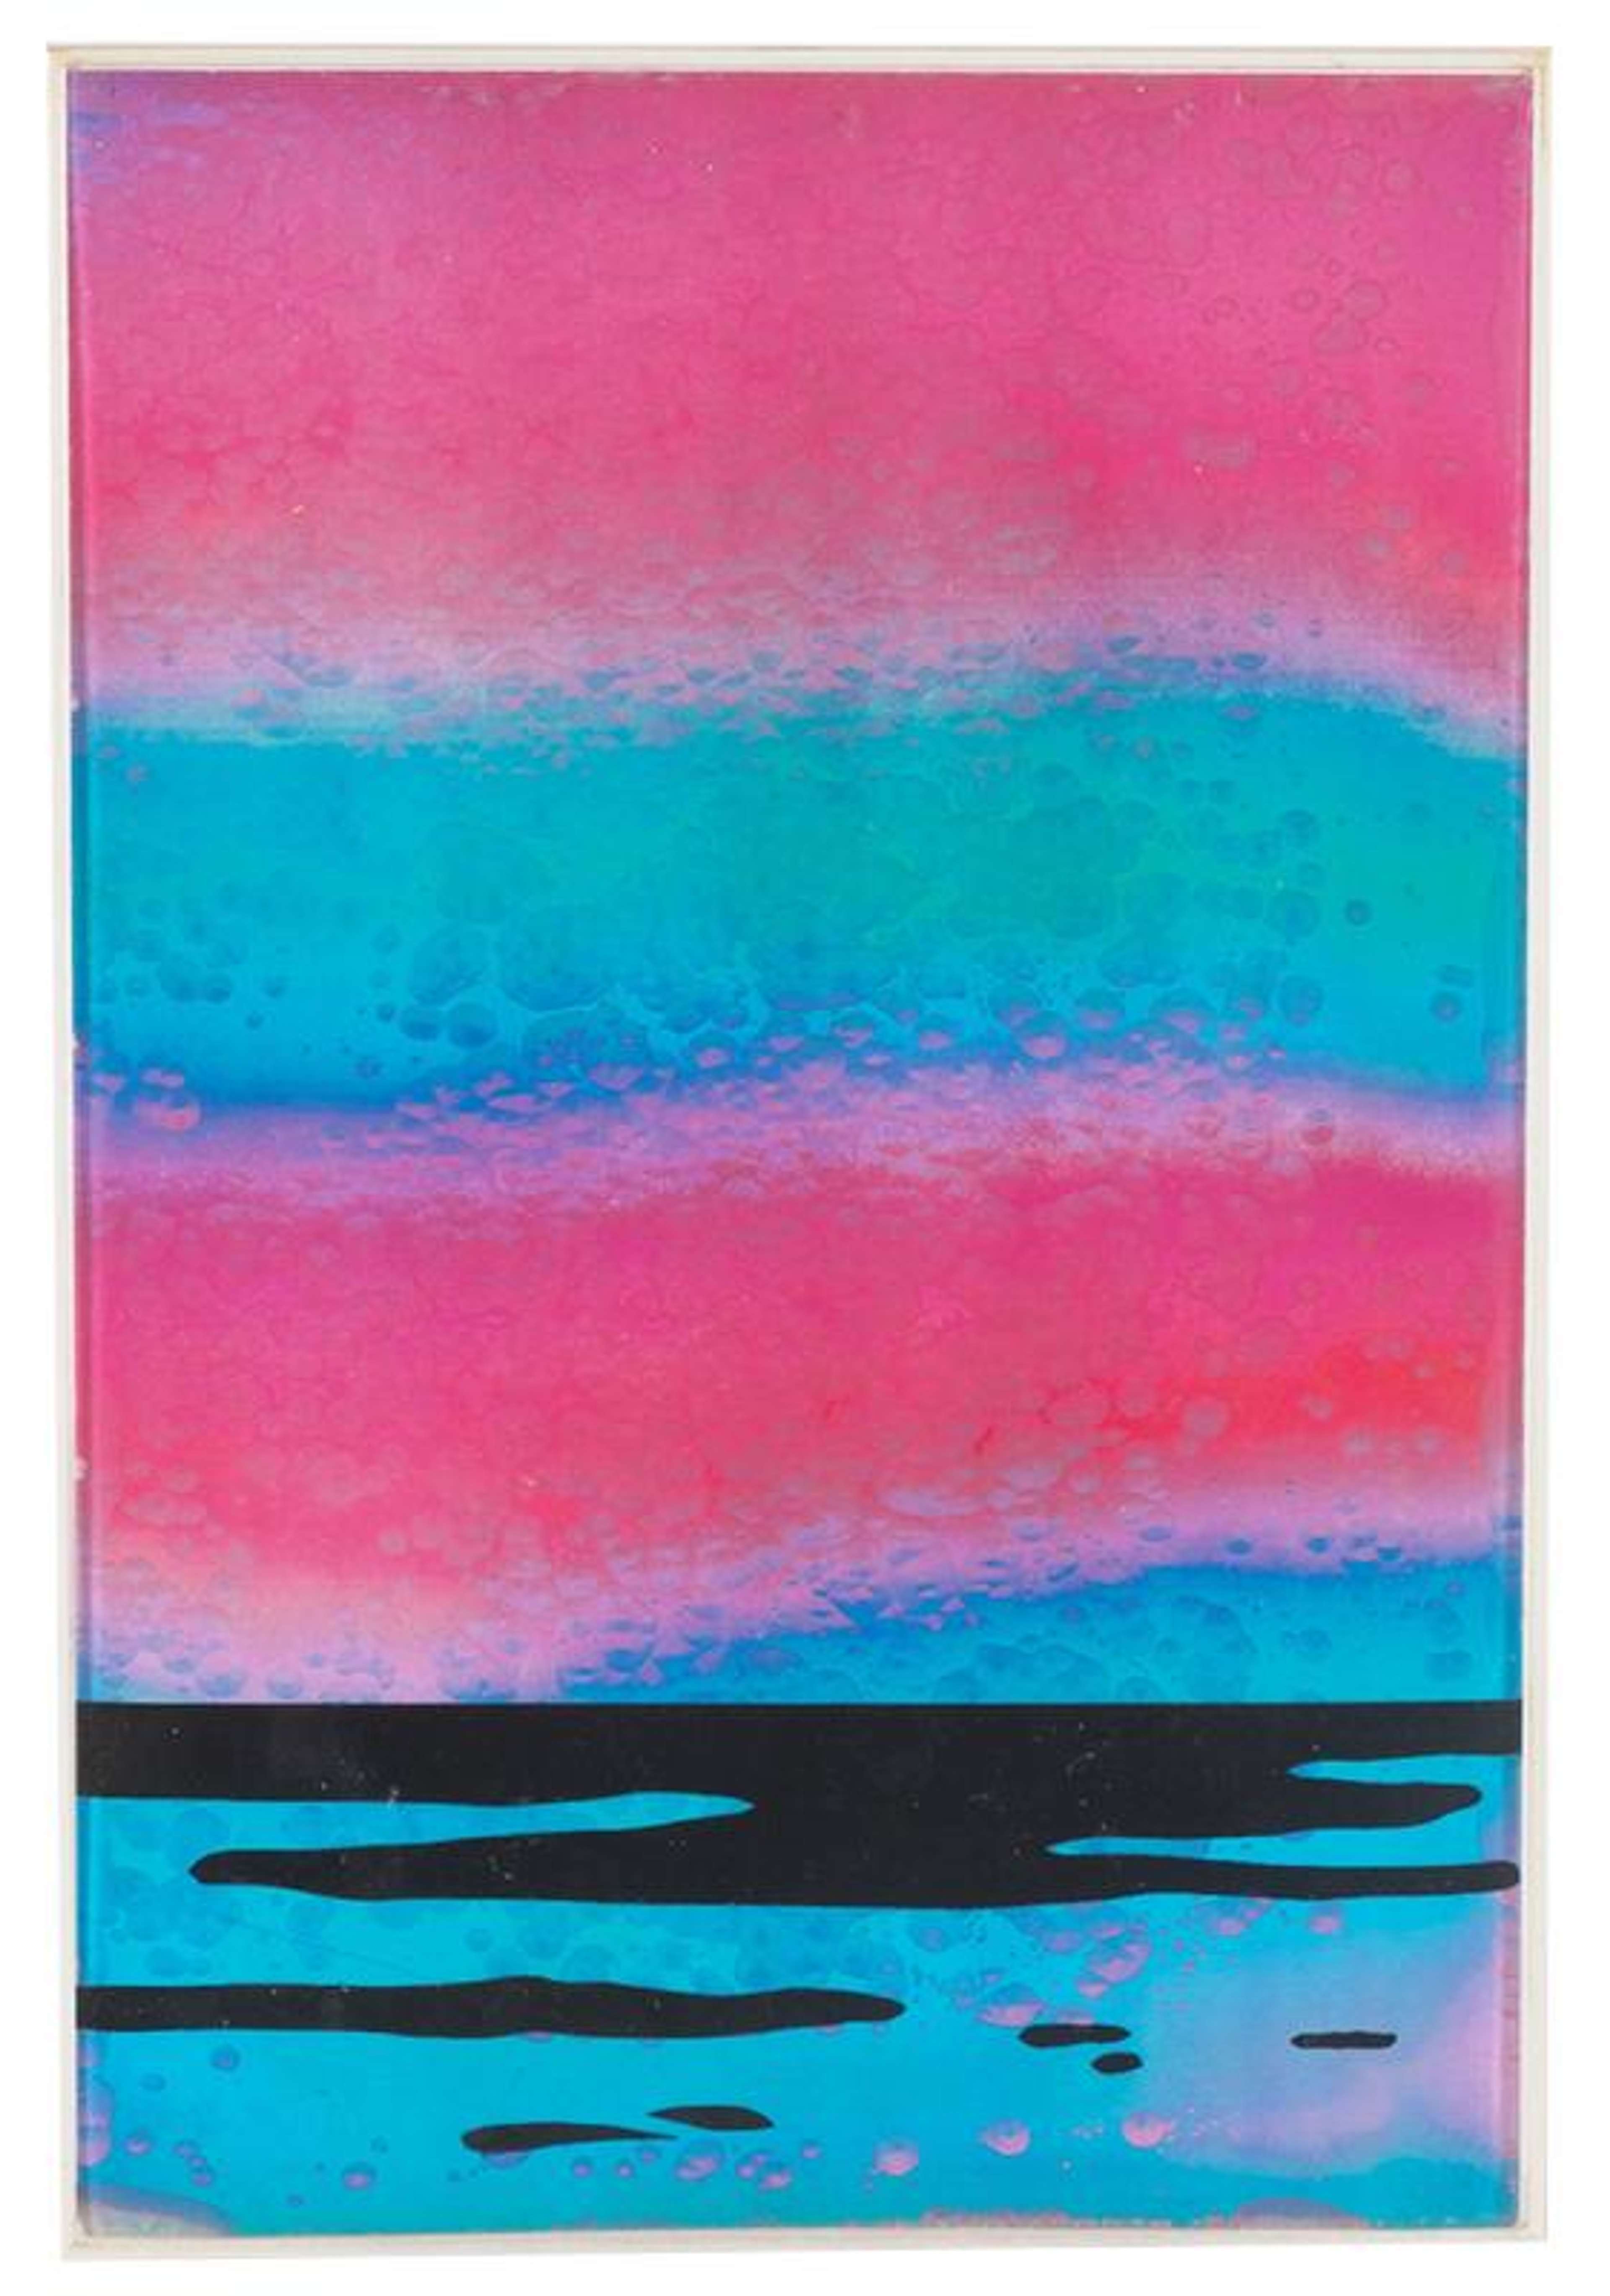 The print exhibits a fuchsia and bright turquoise diffused imaginary seascape.The vibrant pigments constituting the skies in the upper half of the composition blend seamlessly with the similarly hued illustration of water below. This poignant work is unusual in its painterly attributes, making the beholder forget it was fabricated on plastic. 